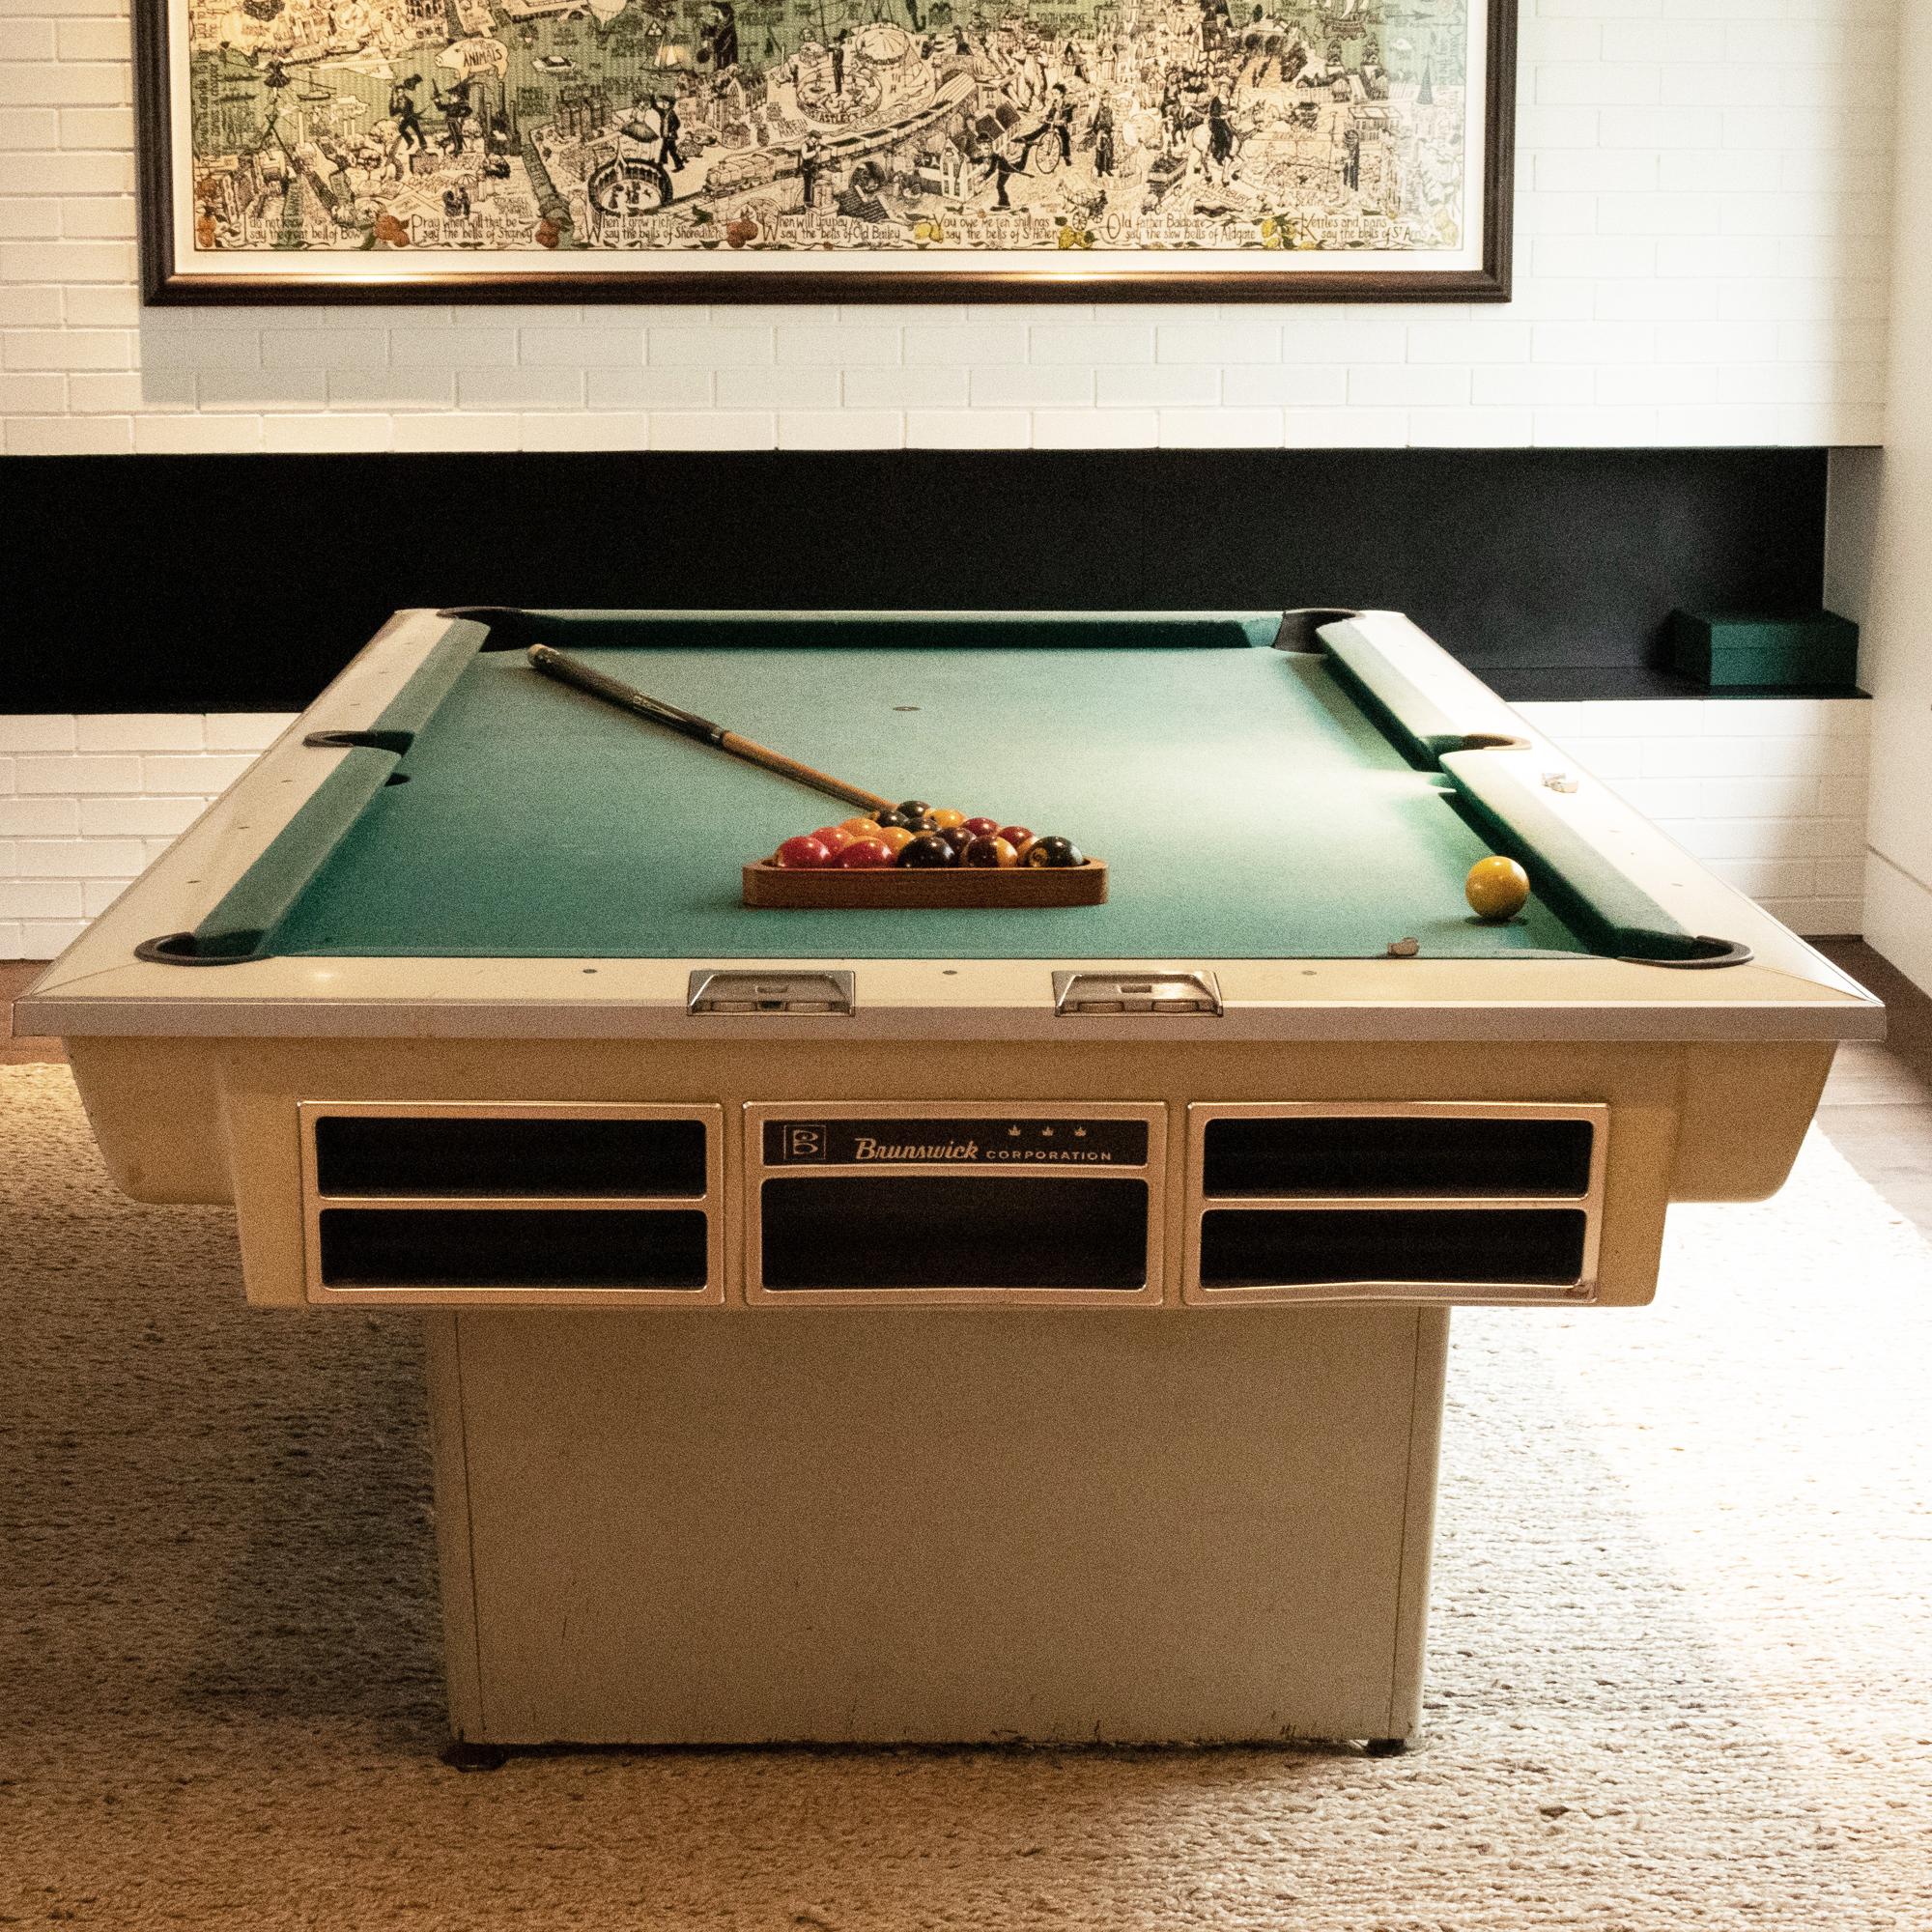 This 1960s original American pool table by Brunswick is a fantastic vintage piece.
The off-white frame sits on angled wooden legs and features a silver metal trim and green cloth.
The pool table has two dials at one end to keep score and comes